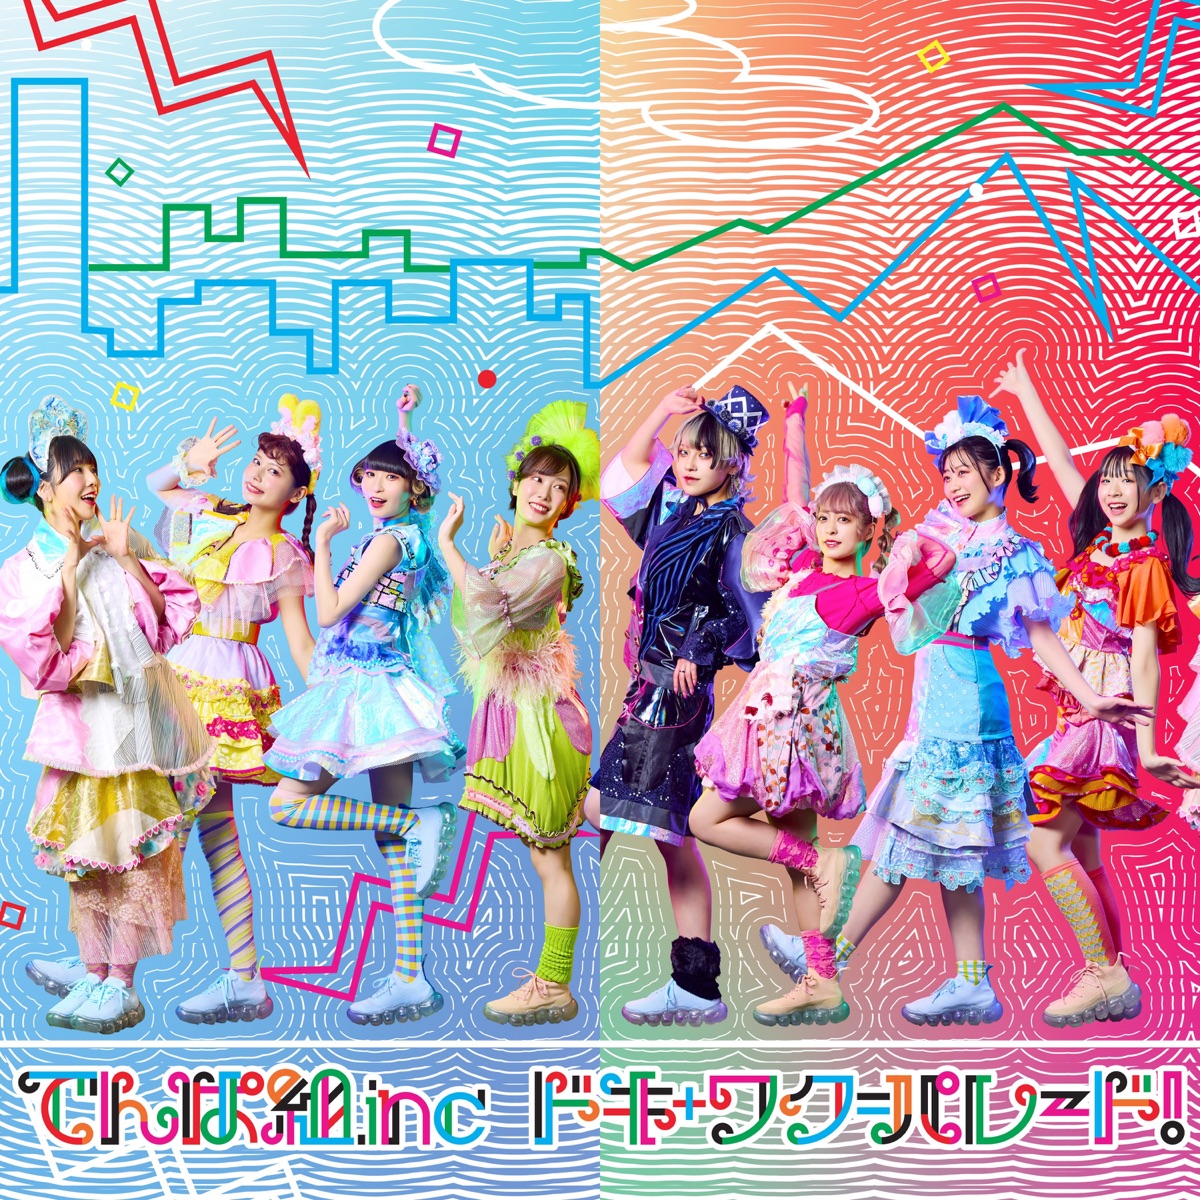 Cover art for『Dempagumi.inc - ドキ+ワク=パレード！』from the release『Doki+Waku=Parade!